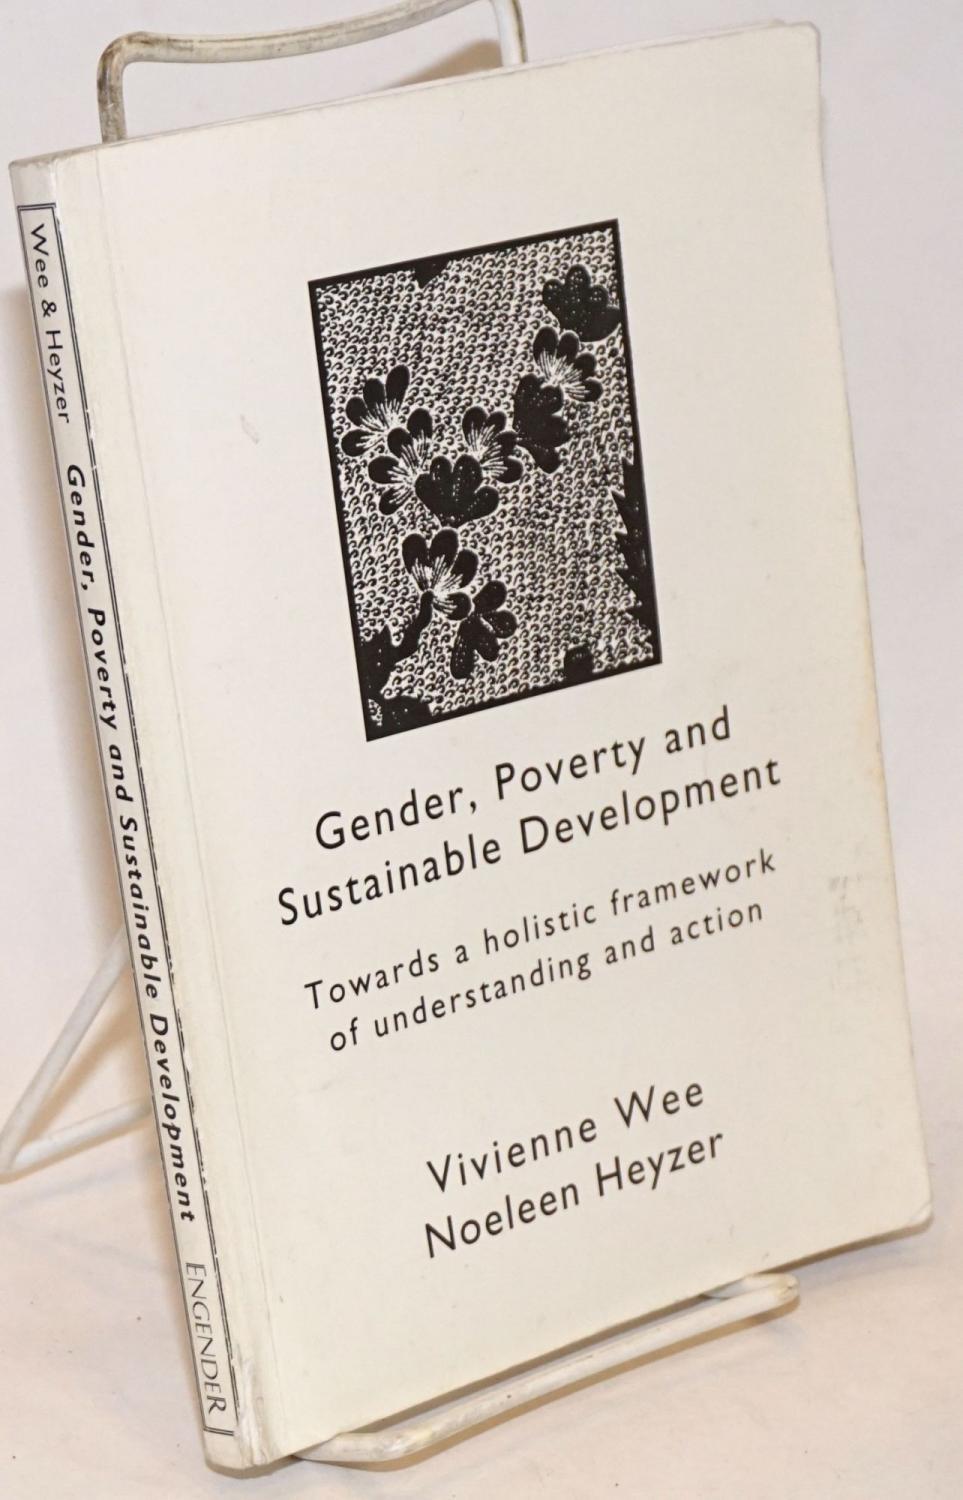 Gender, Poverty, and Sustainable Development: Towards a holistic framework of understanding and action - Wee, Vivienne [and] Noeleen Heyzer